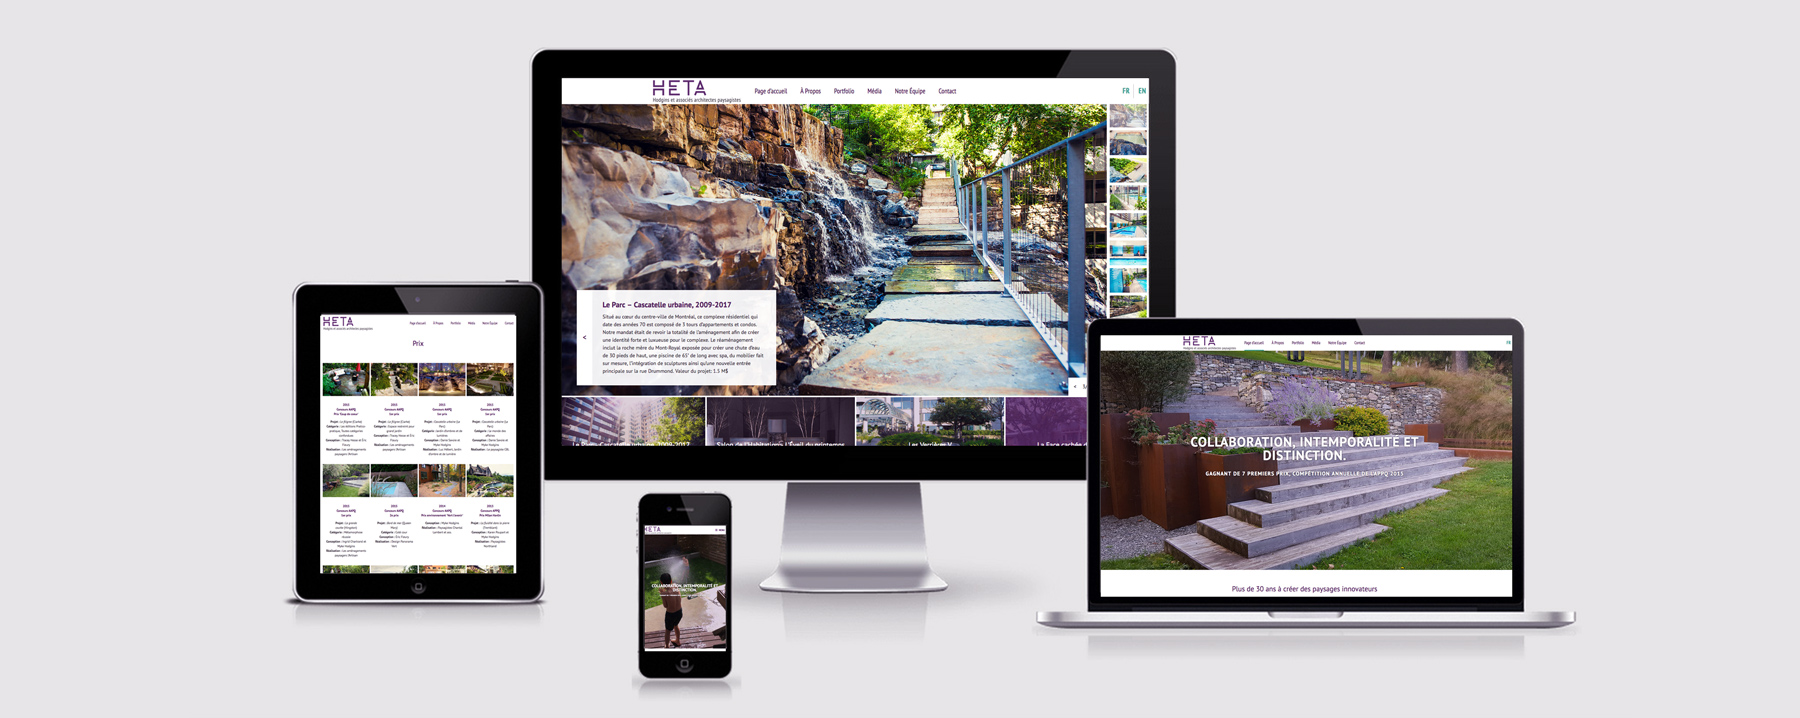 Hodgins and associates architecture landscape company new website on display on iMac, Macbook, iPad and iPhone